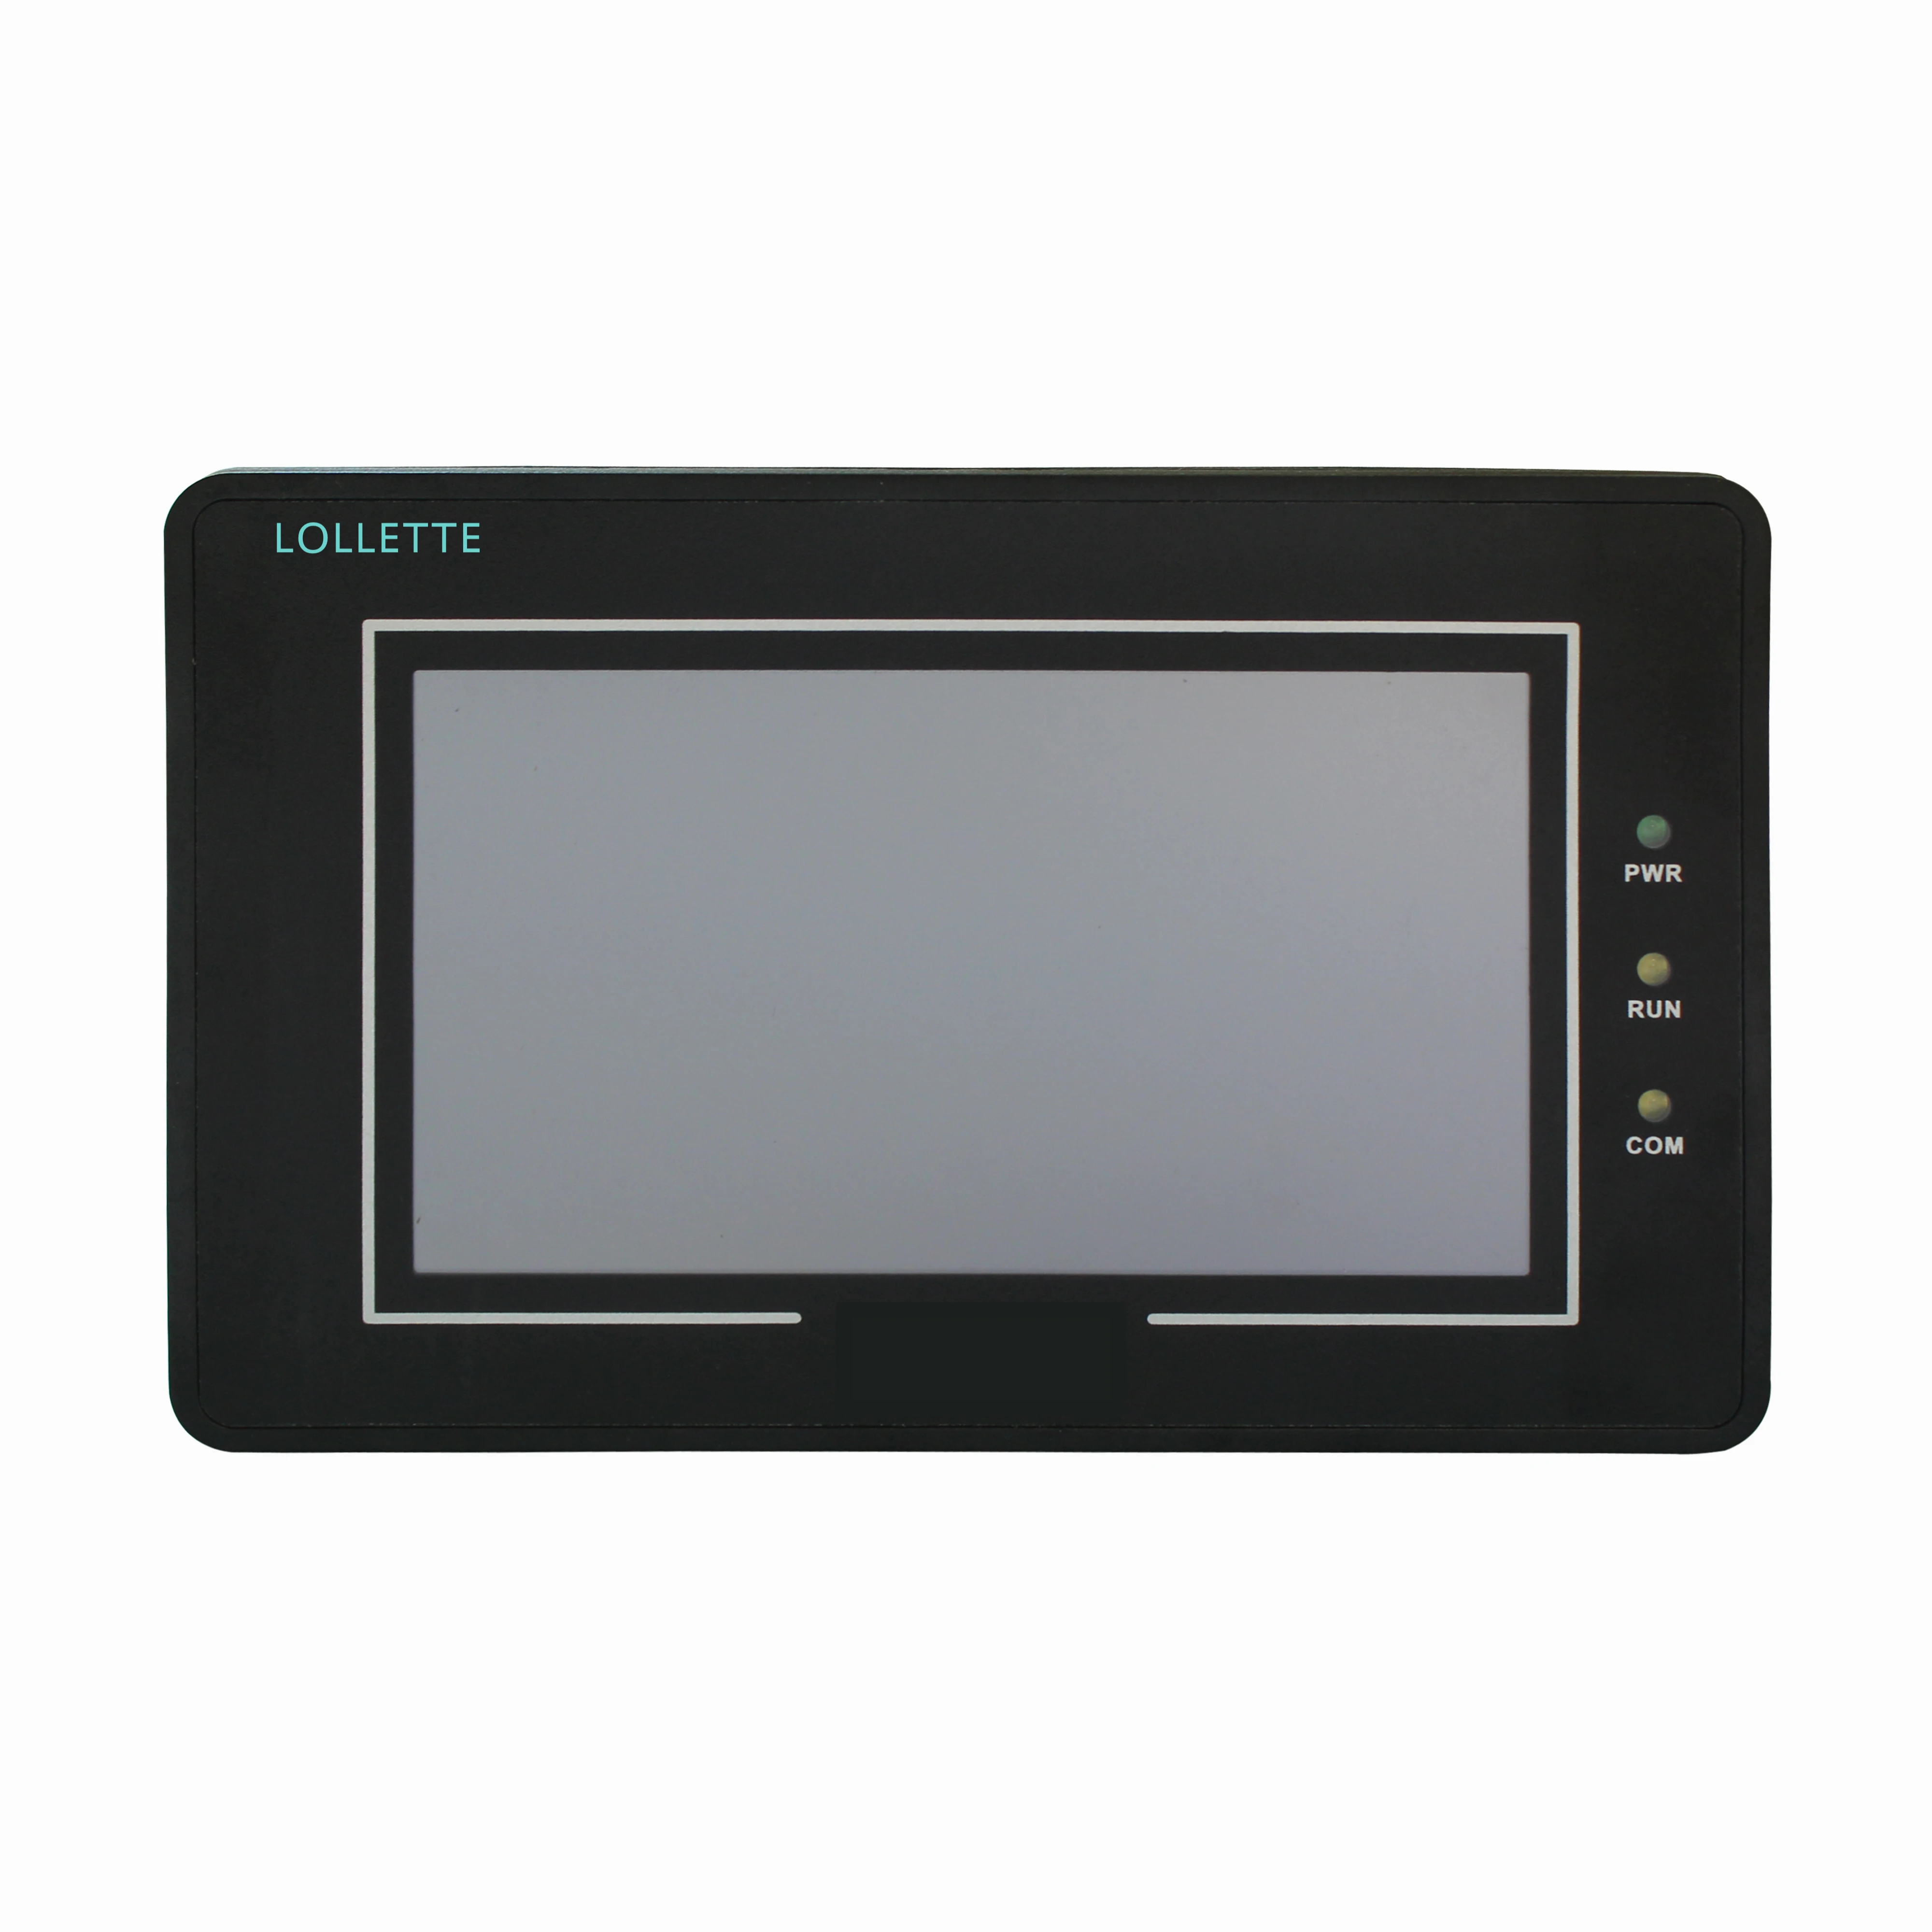 LOLLETTE HMI touch screen panel 4.3 inch support rs232/rs422/rs485